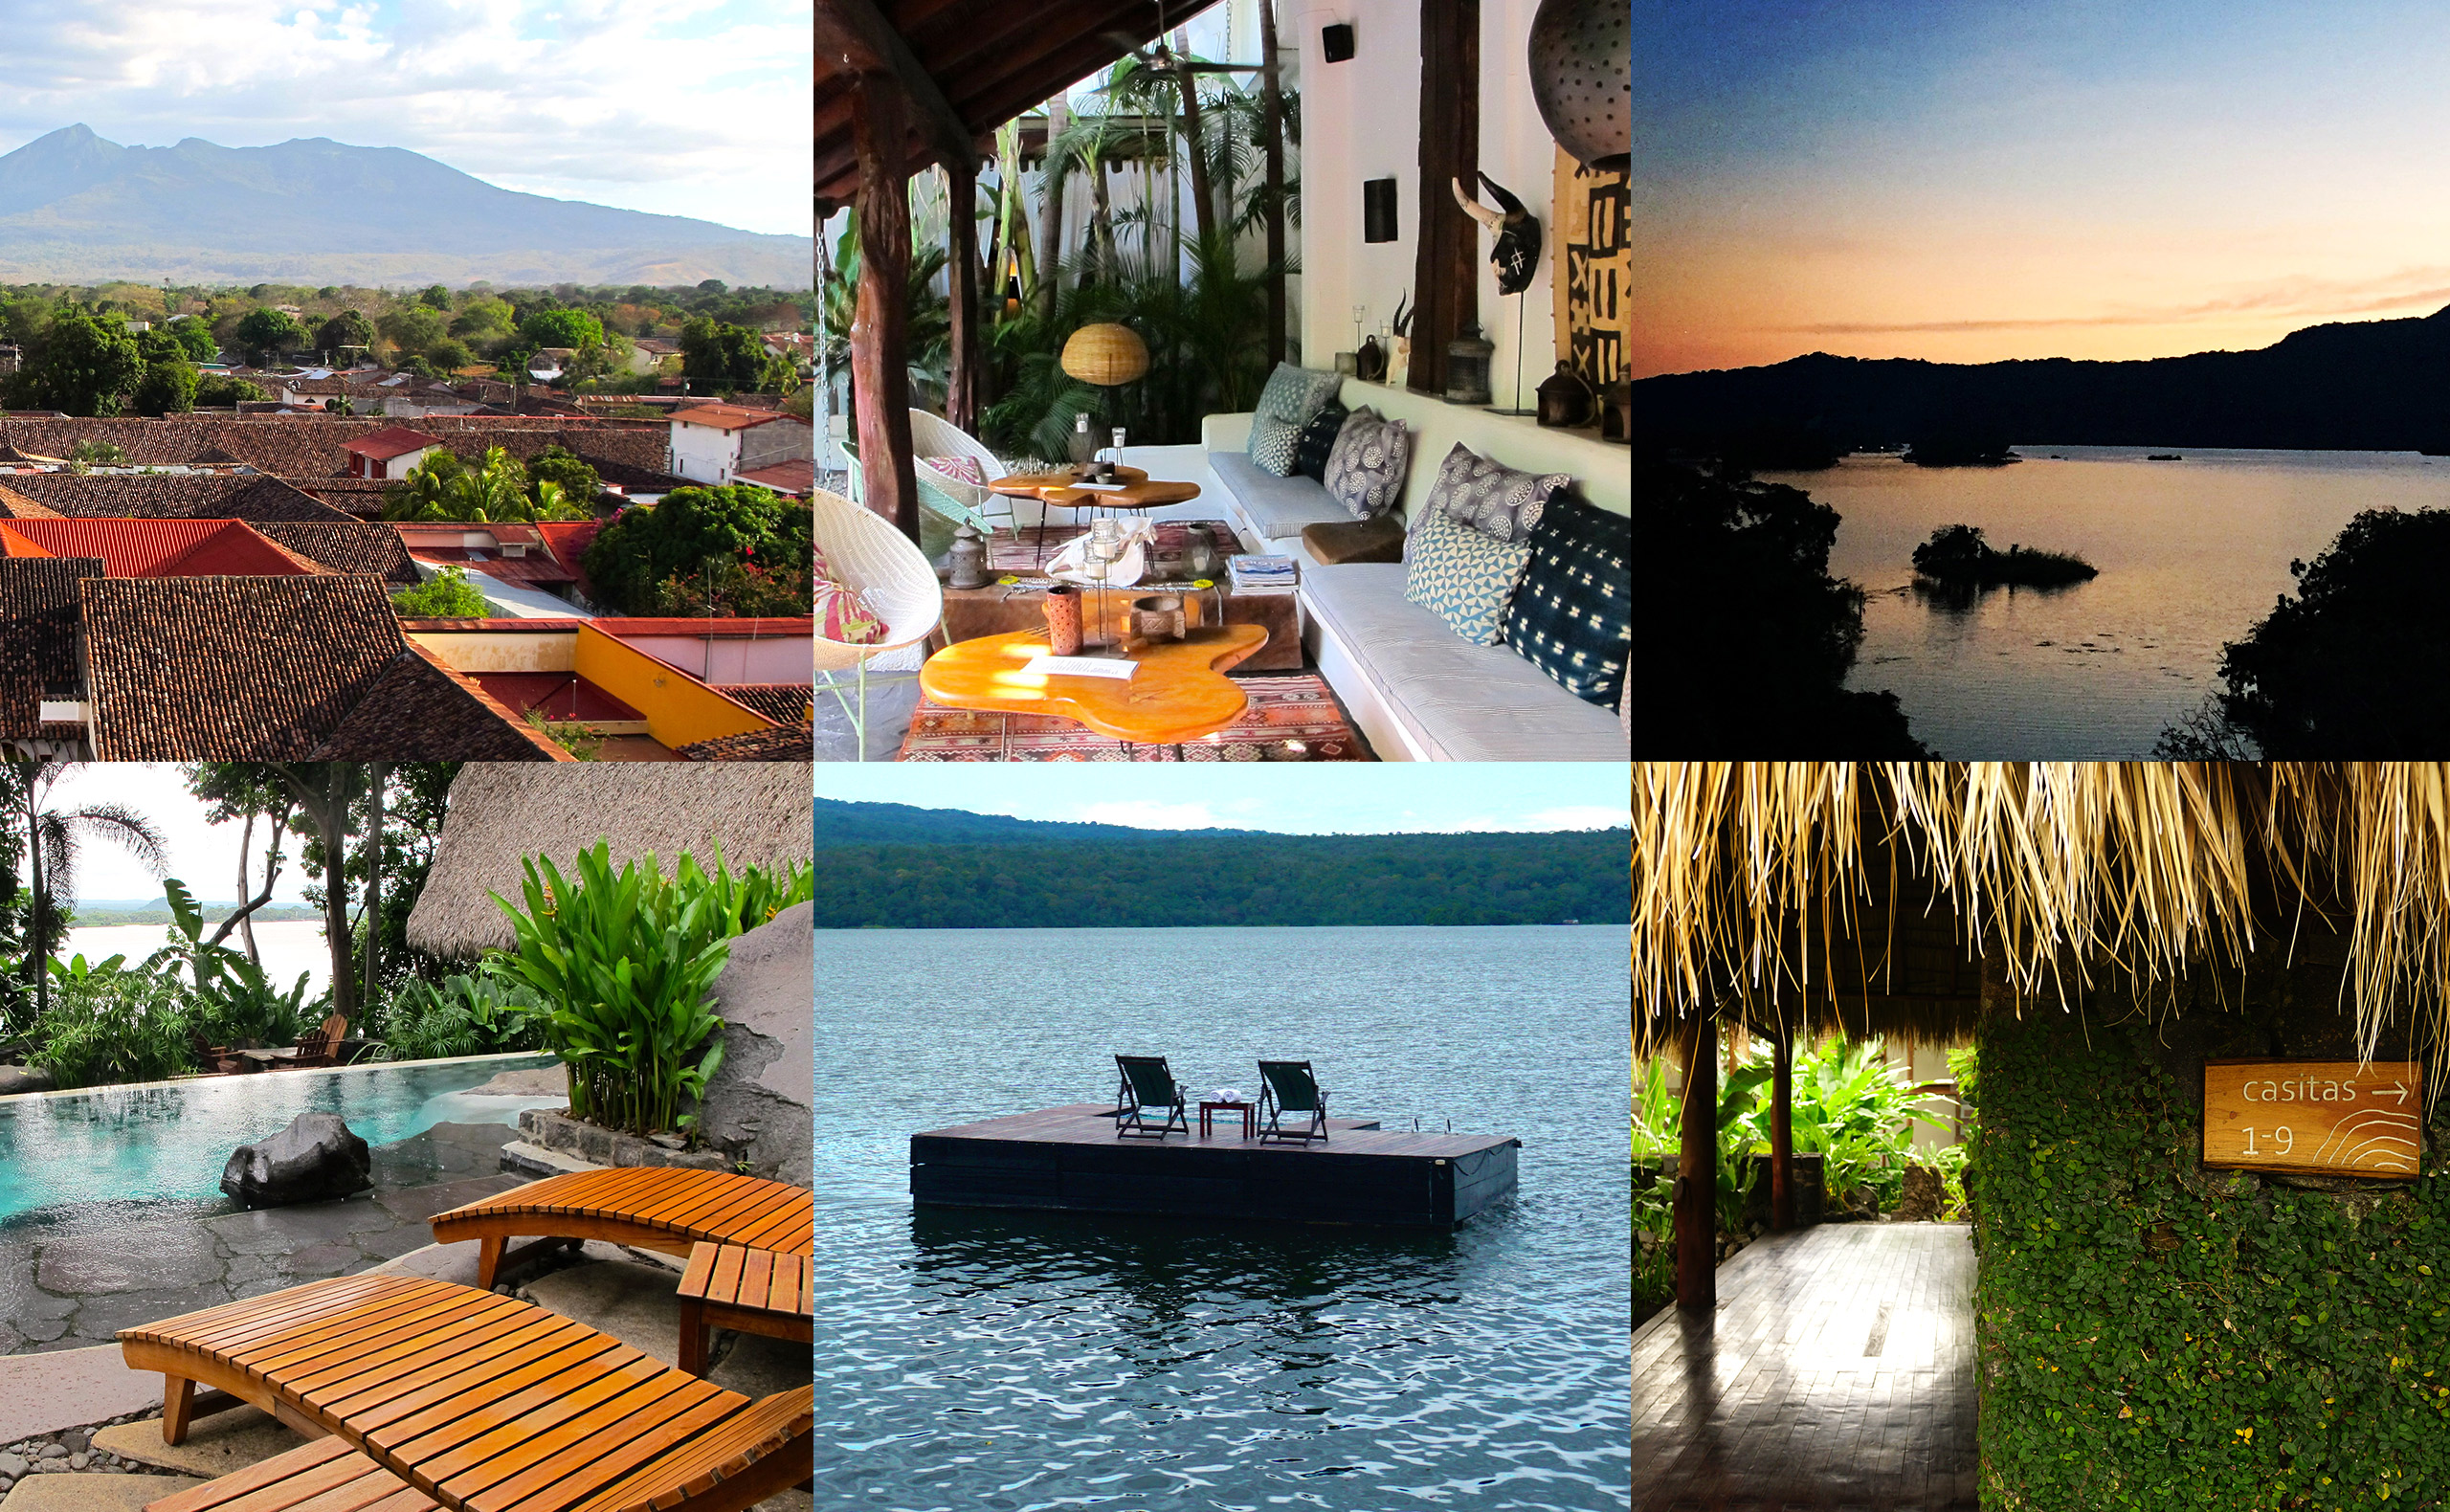                             <em>(clockwise from top left)</em>: Dormant volcanoes hover over Granada&#x2019;s tile roofs; the courtyard of Granada&#x2019;s Tribal Hotel; Las Isletas in Lake Nicaragua; a sign for Jicaro Island Ecolodge&#x2019;s casitas; a floating platform in Lake Nicaragua; swimming pool at Jicaro Island Ecolodge